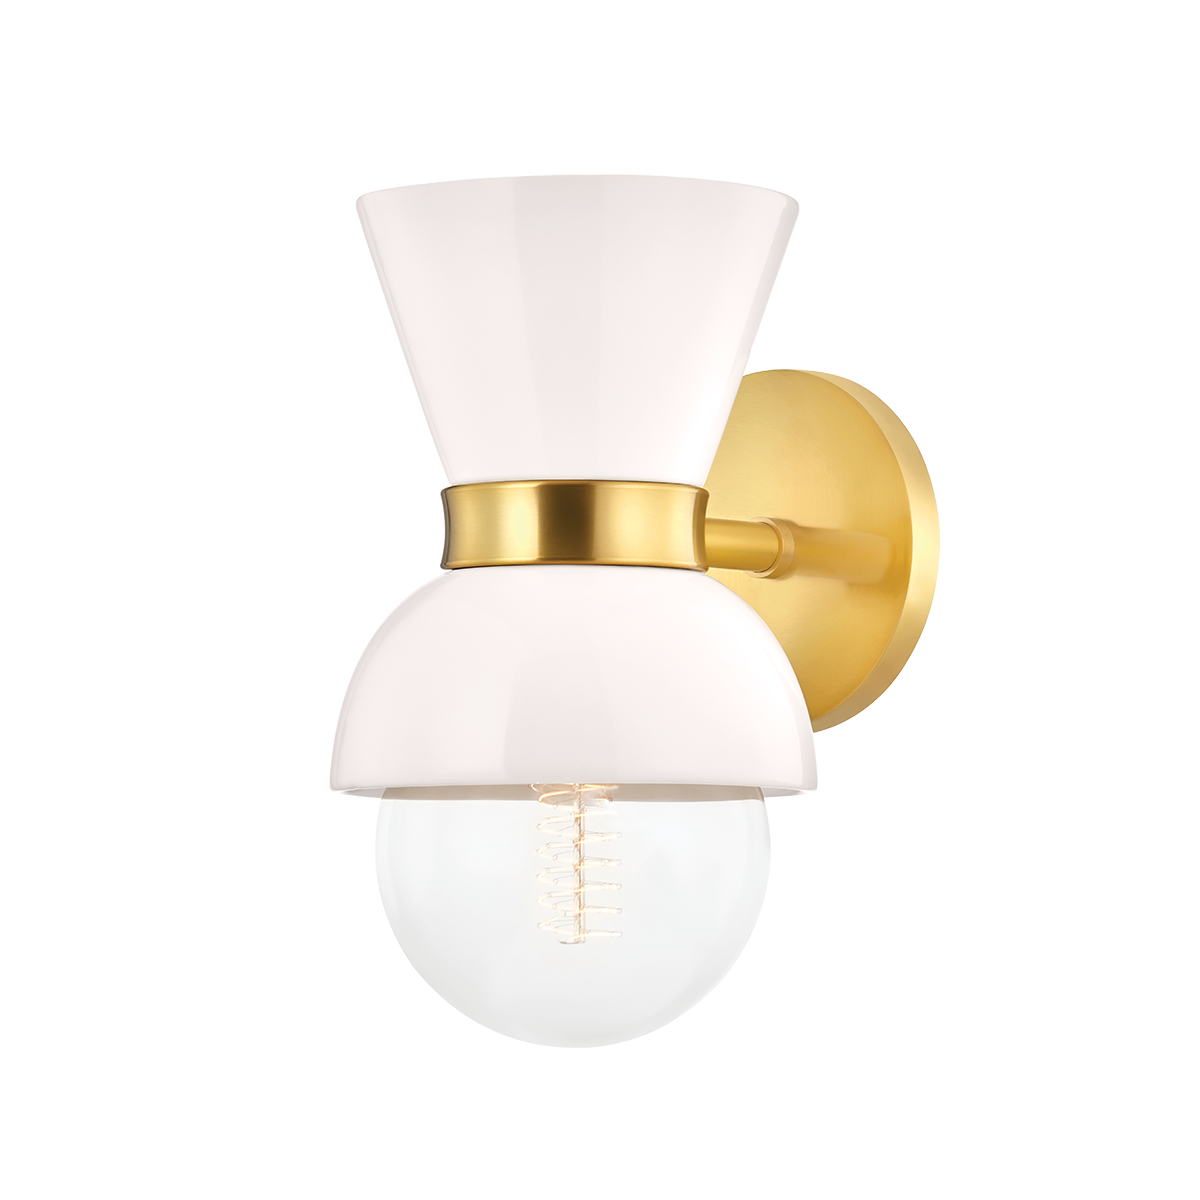 Gillian 1 Light Wall Sconce-Mitzi-HVL-H469101-AGB/CCR-Outdoor Wall SconcesAged Brass / Ceramic Gloss Cream-1-France and Son